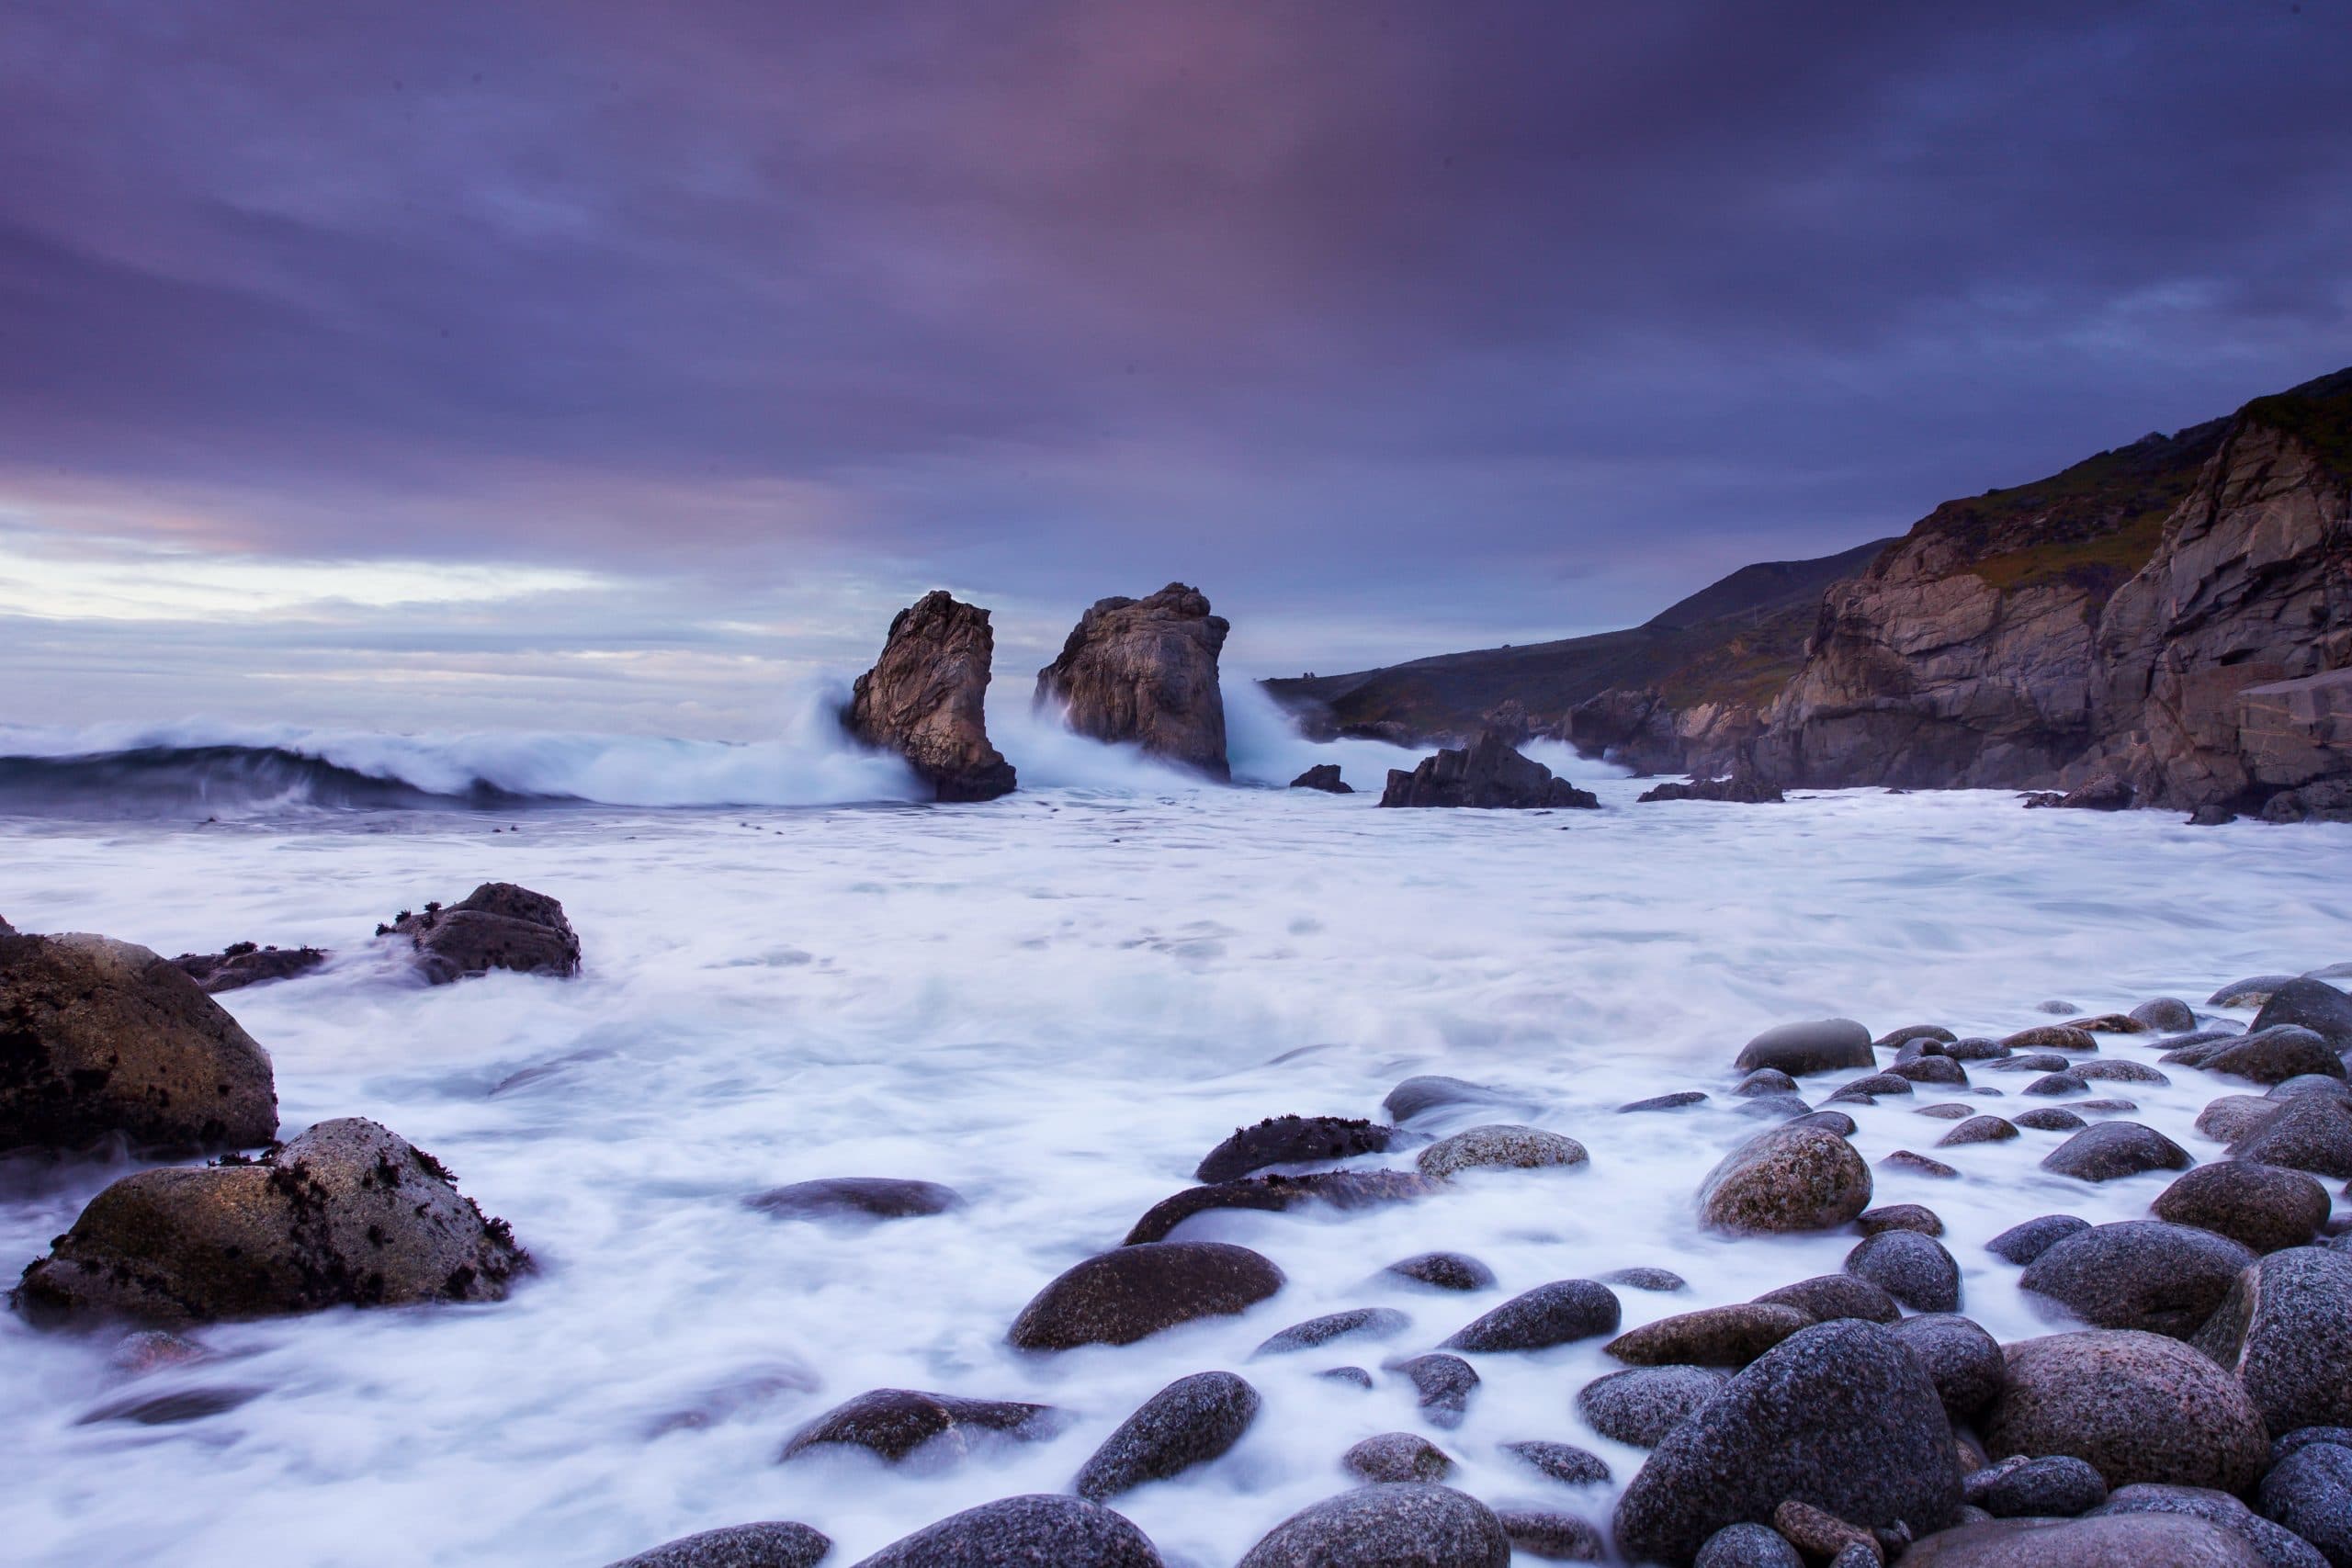 Tips For Long-Exposure Ocean Photography